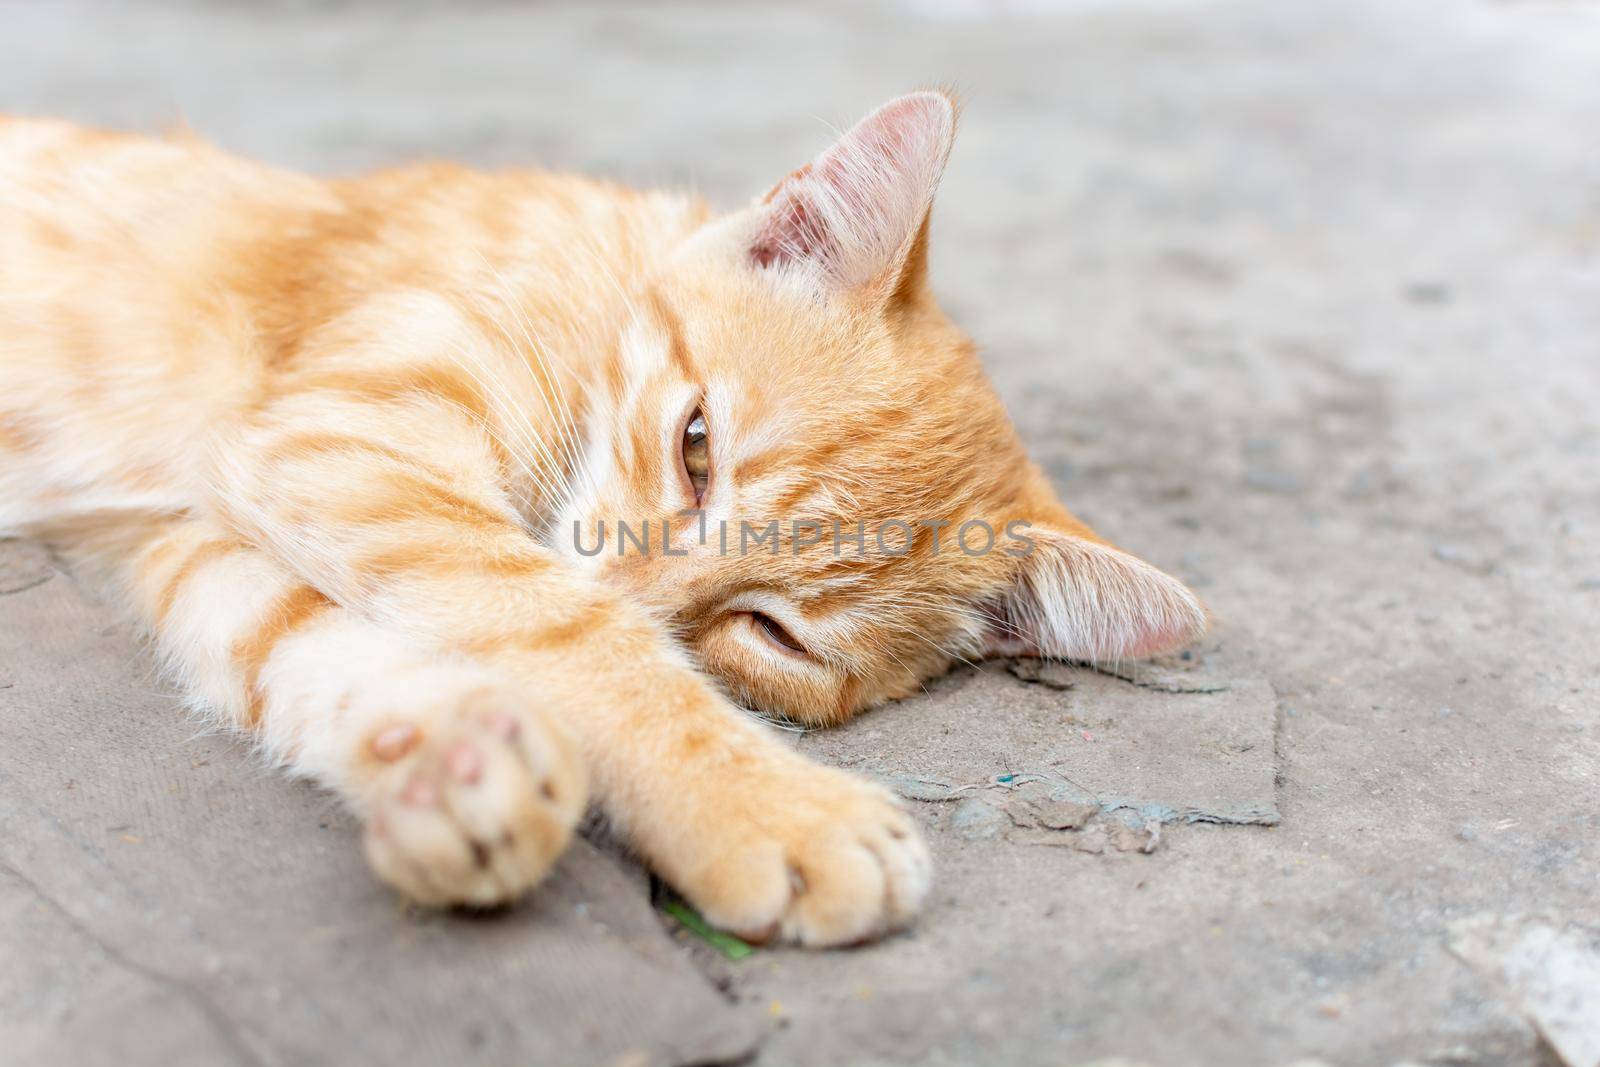 A cute little ginger kitten lies on the concrete and looks into the lens with narrowed eyes.